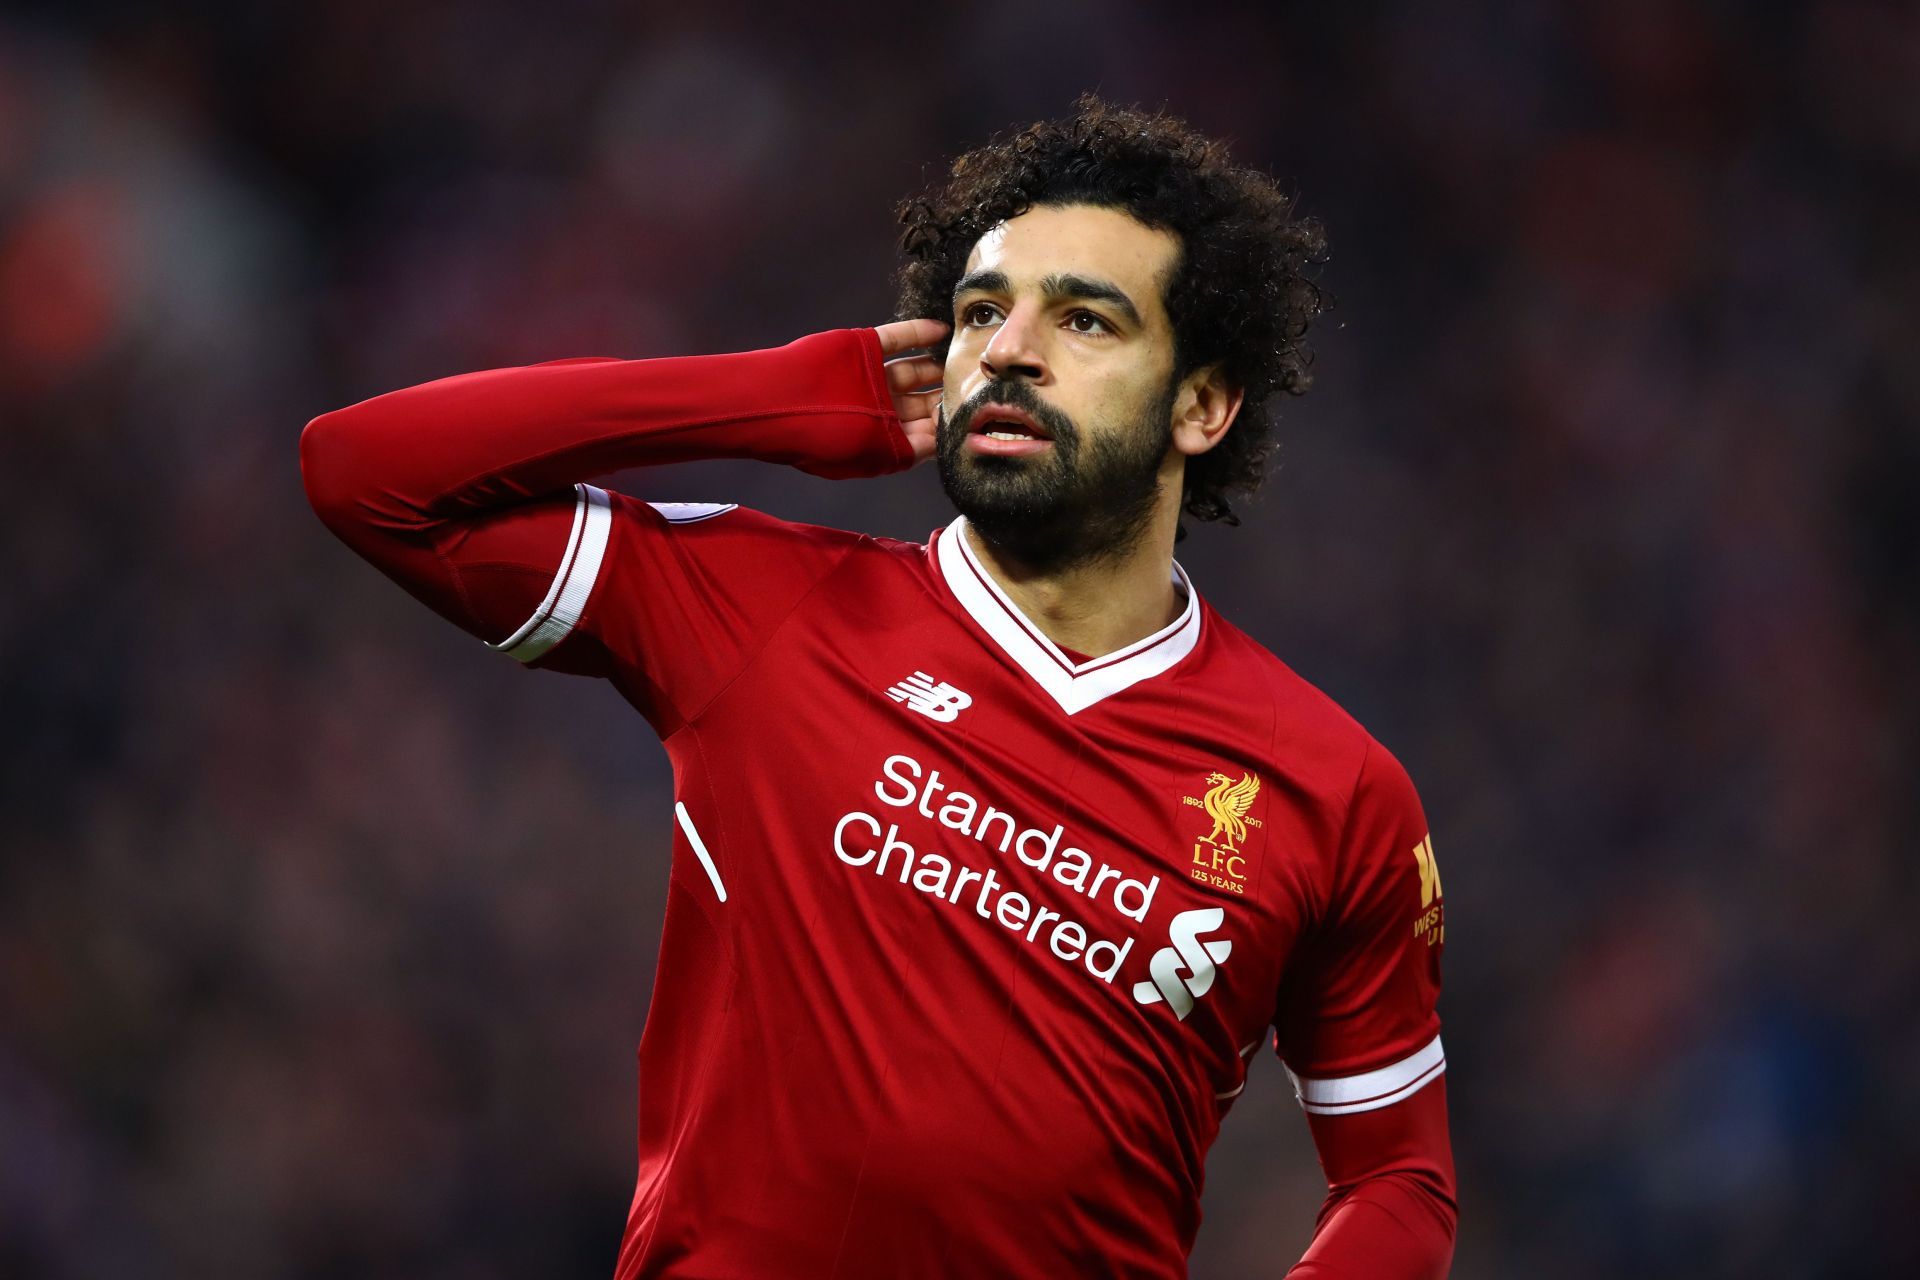 Liverpool attacker - Mohamed Salah is one of the contenders for the Golden Boot award.